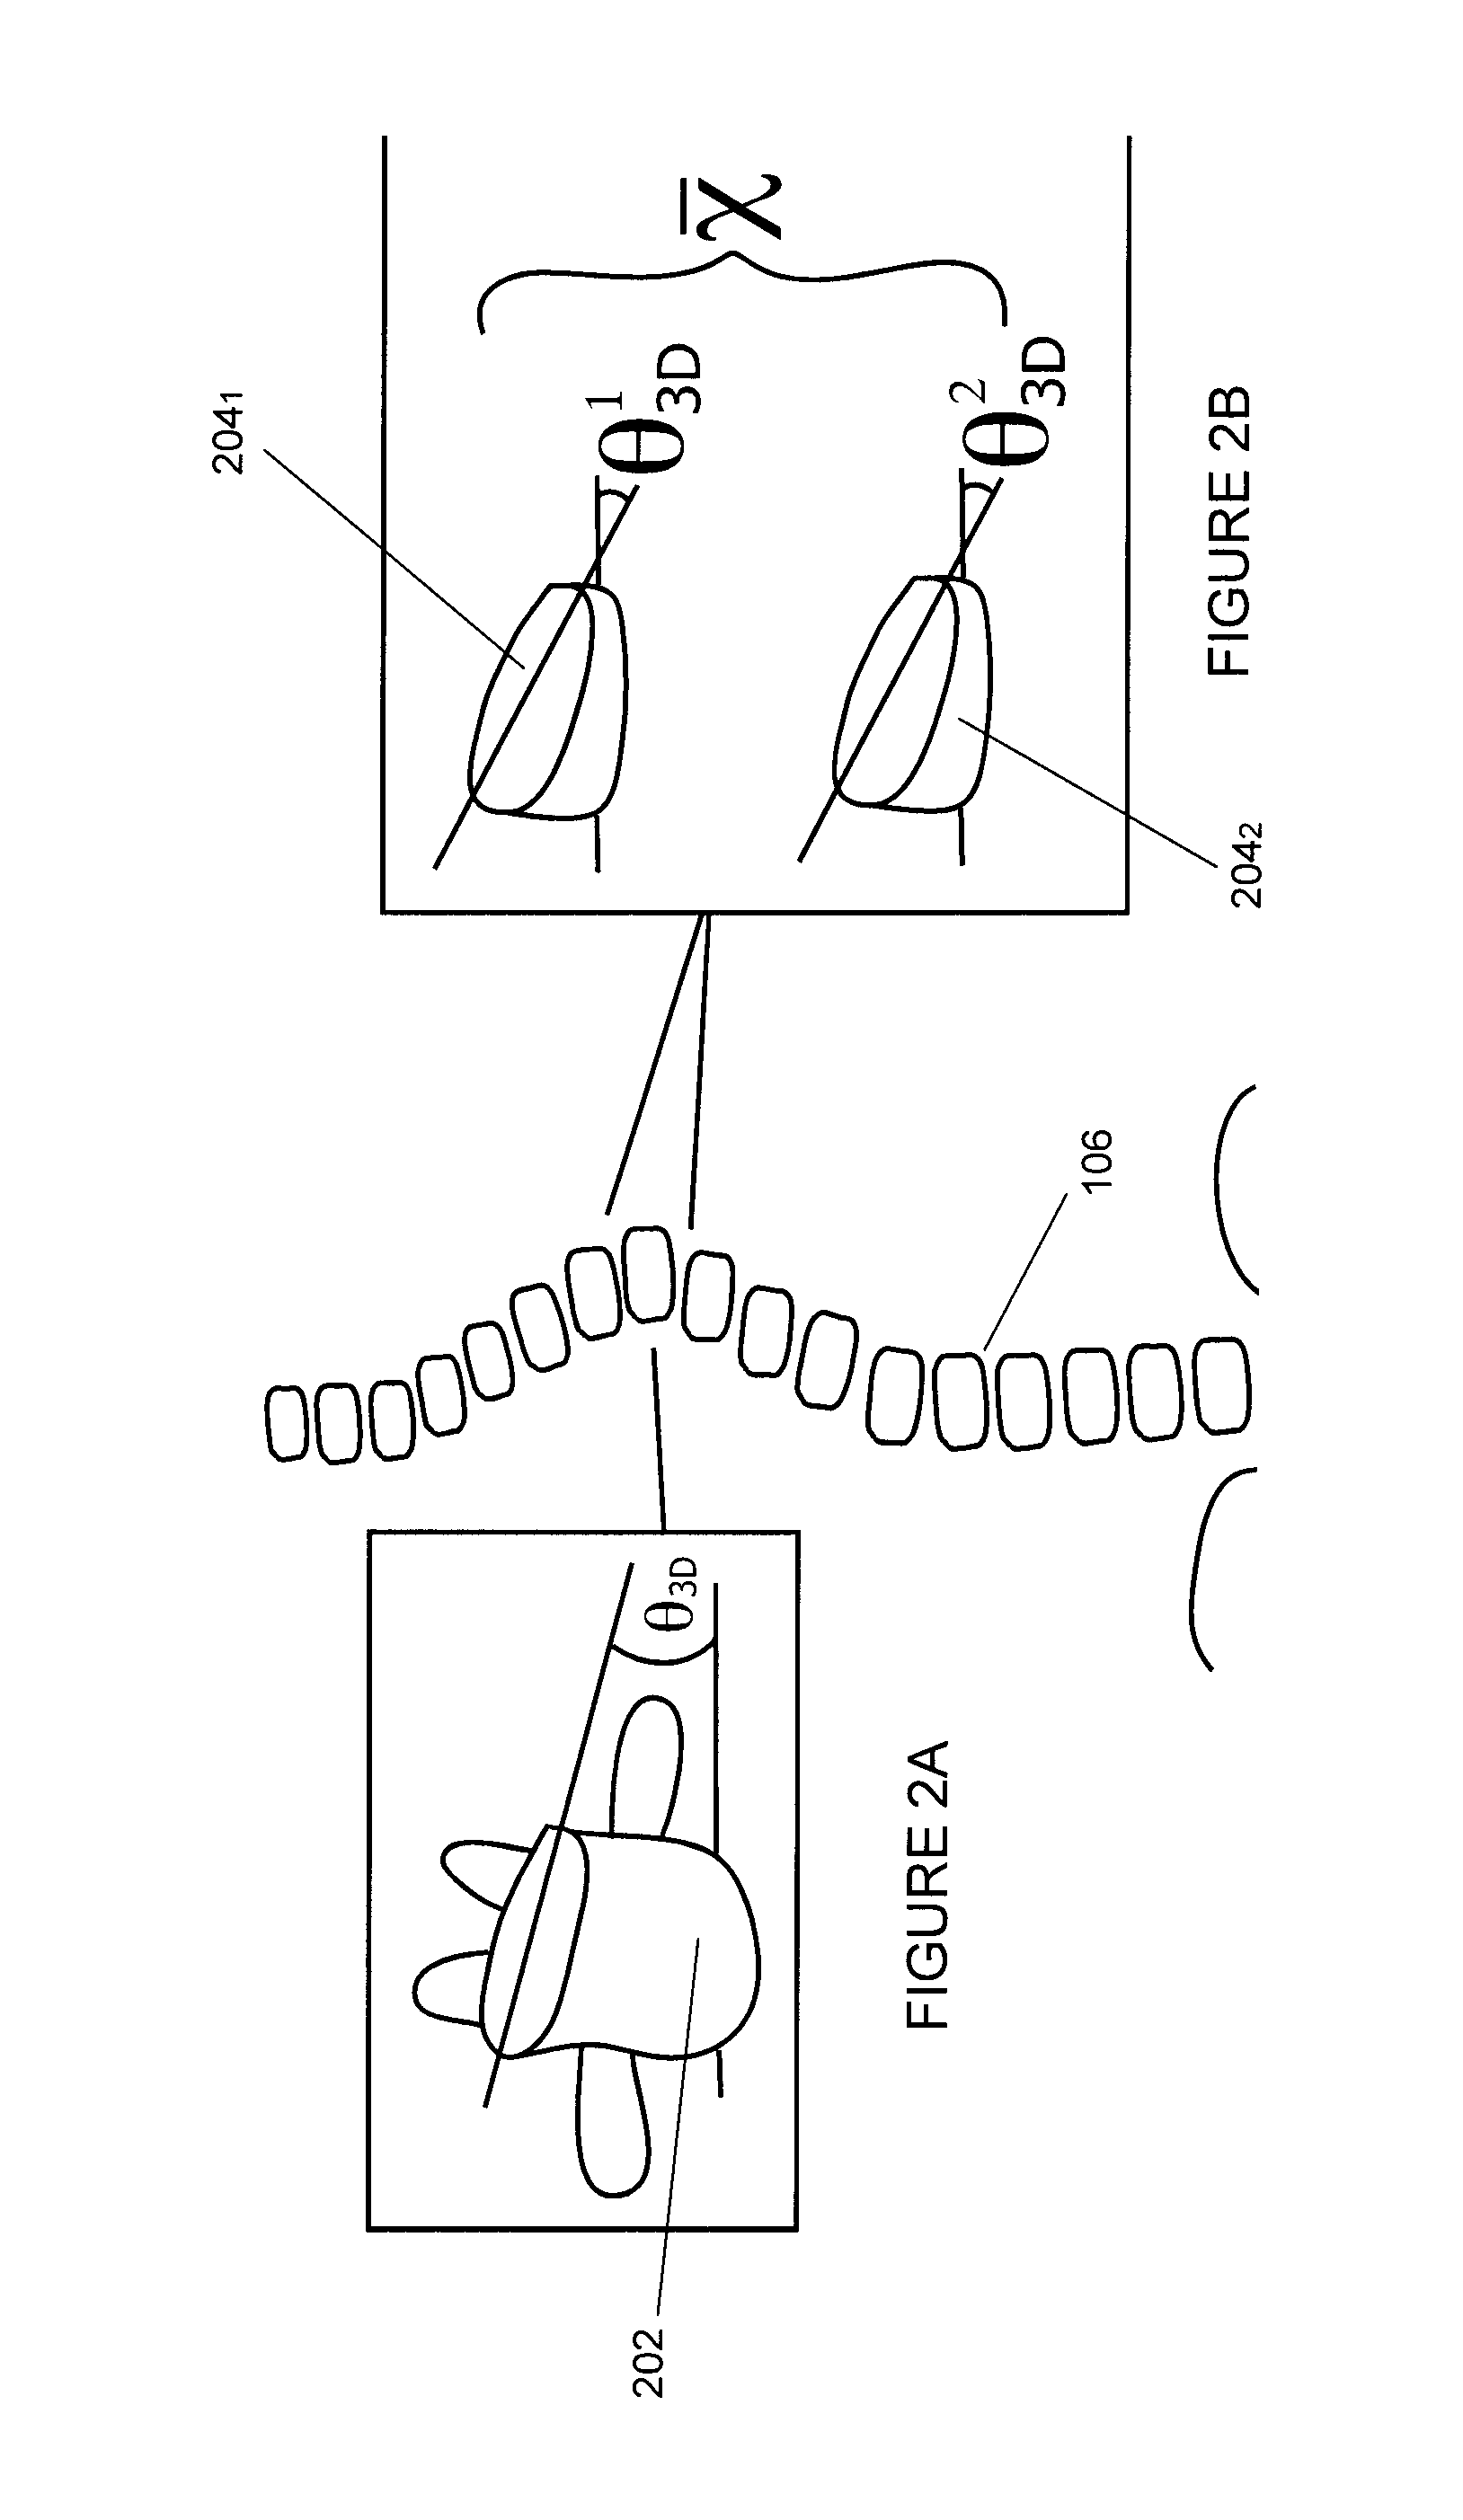 System and method for predicting scoliosis progression